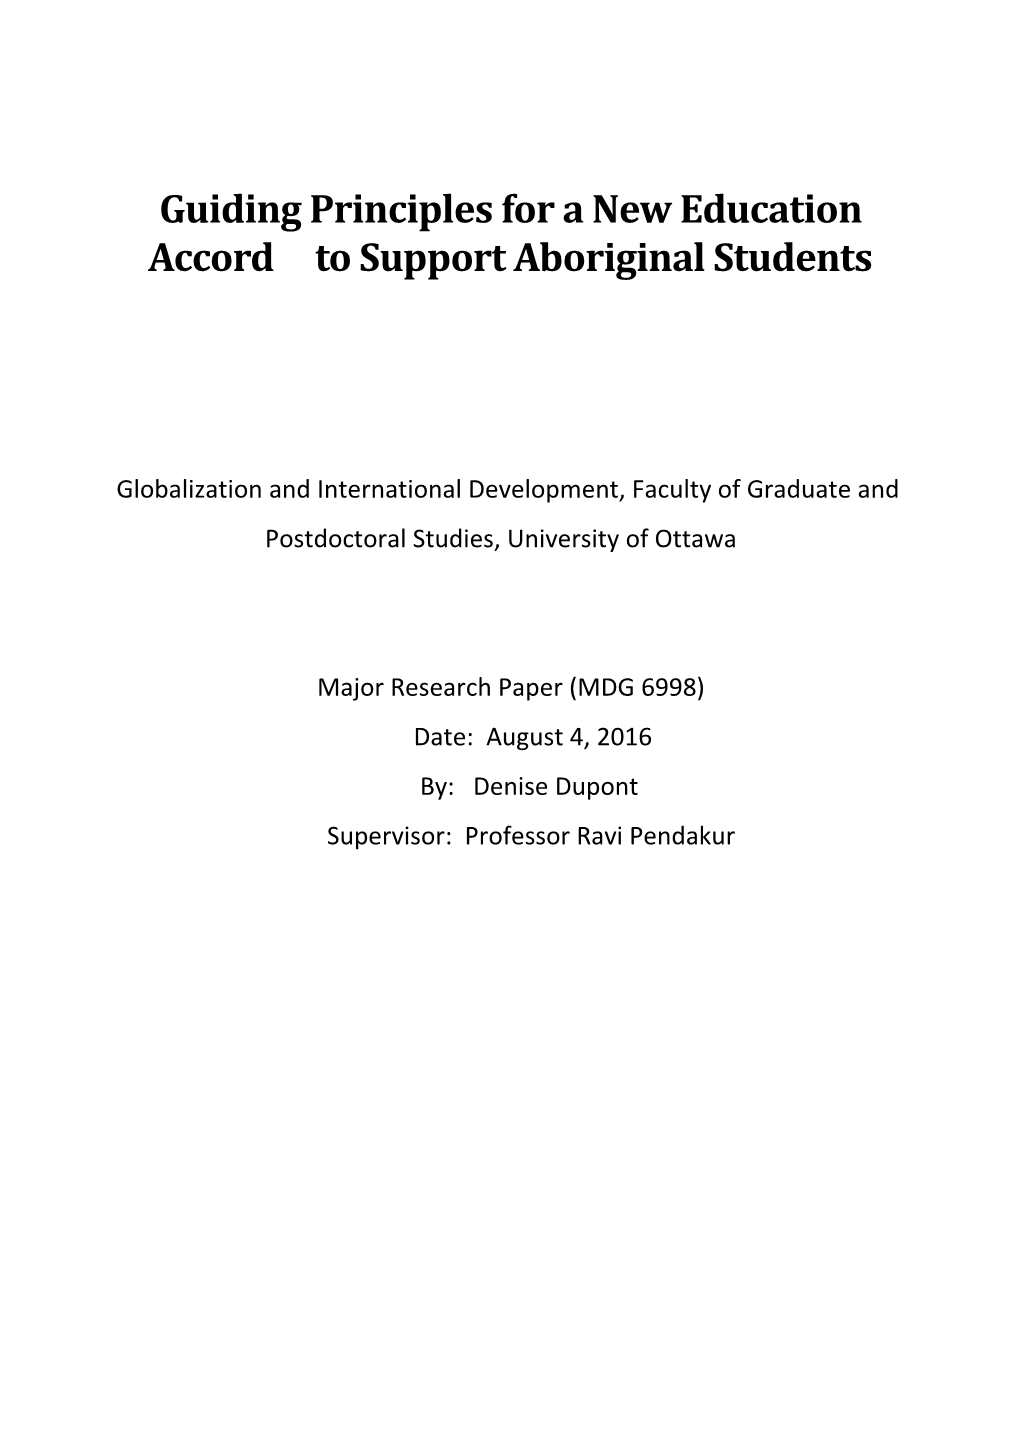 Guiding Principles for a New Education Accord to Support Aboriginal Students